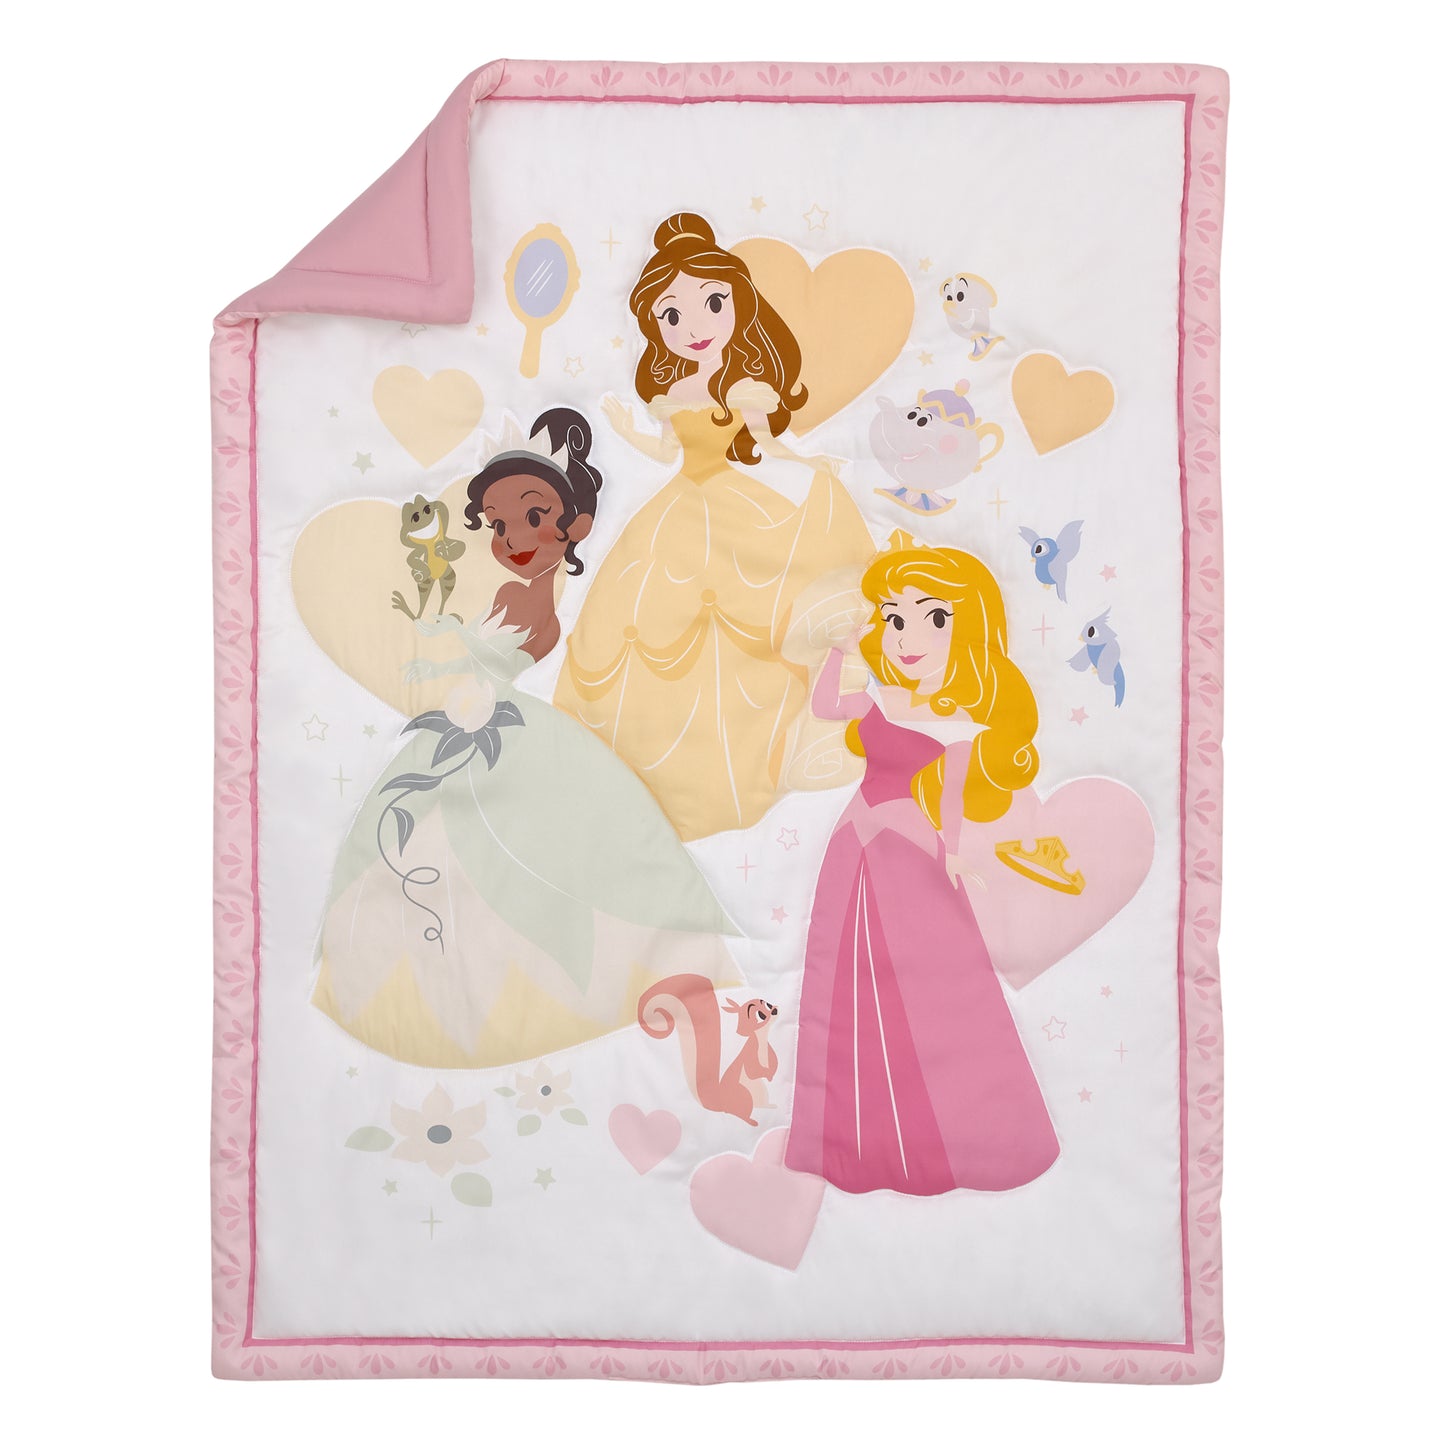 Disney Make A Wish Multi Princess Pink and White Belle, Tiana, and Aurora 3 Piece Nursery Crib Bedding Set - Comforter, Fitted Crib Sheet, and Crib Skirt